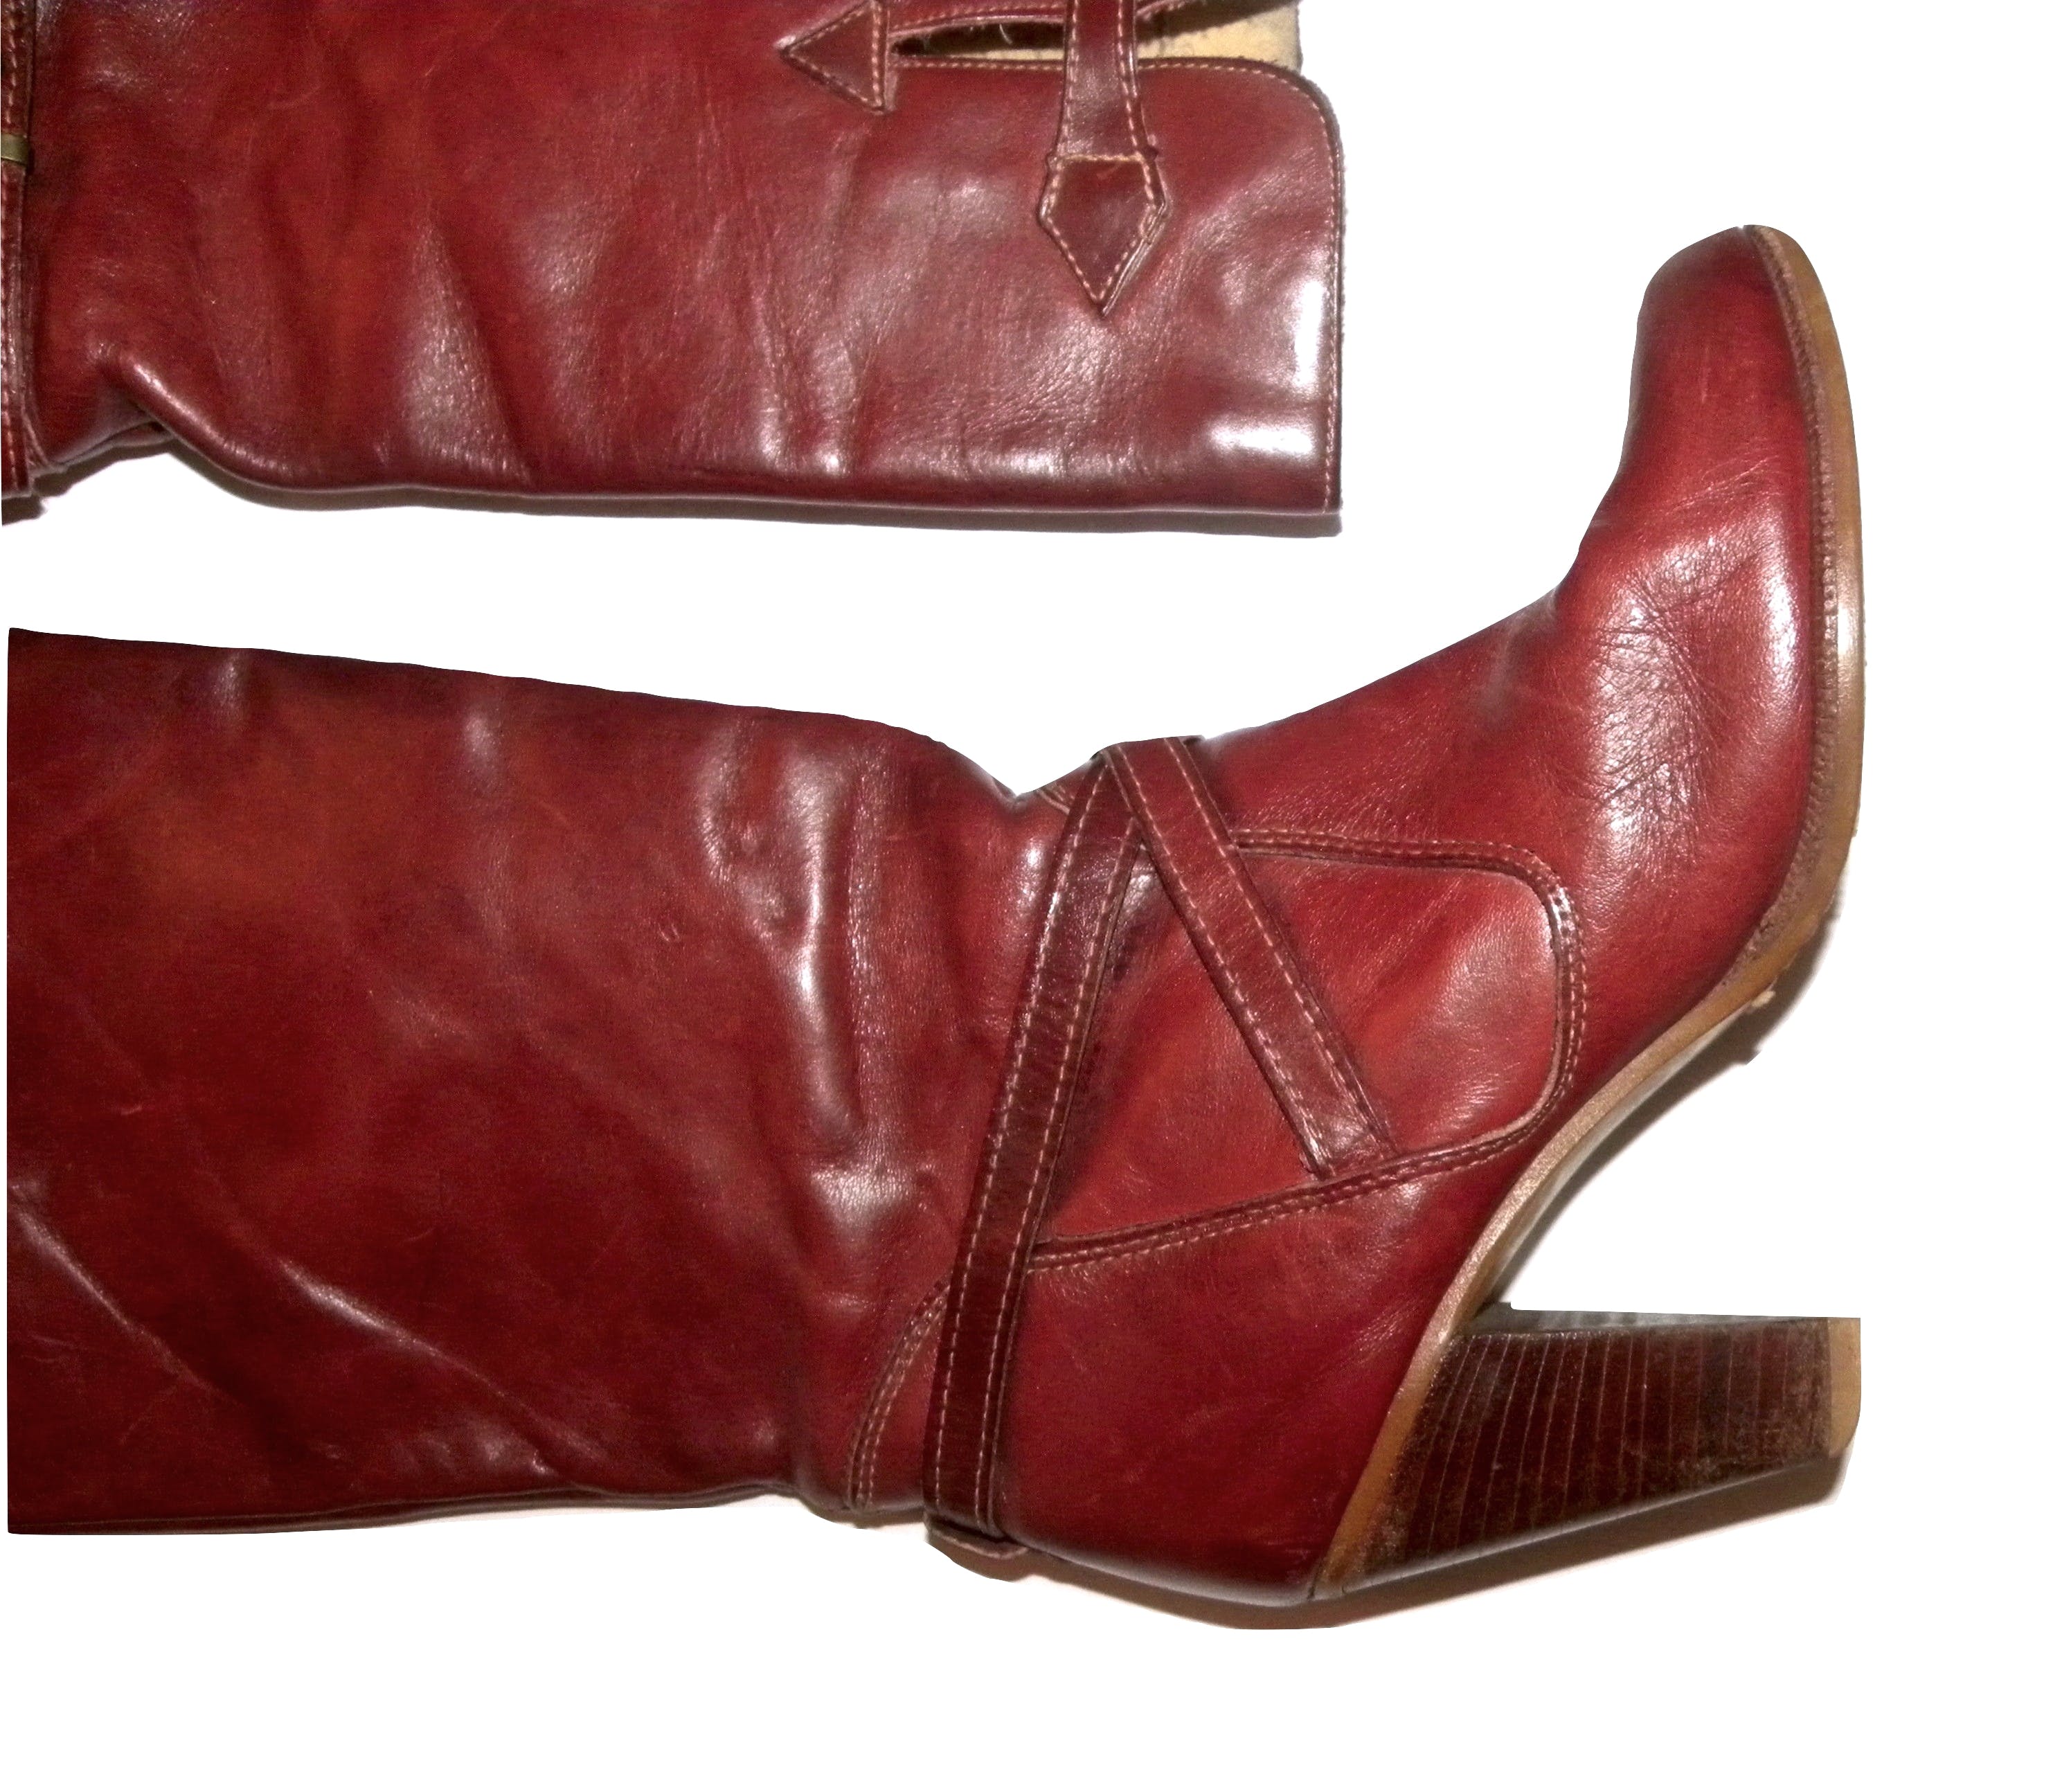 Vintage 70's Heeled Leather Boots with Straps In Cognac by Zodiac ...